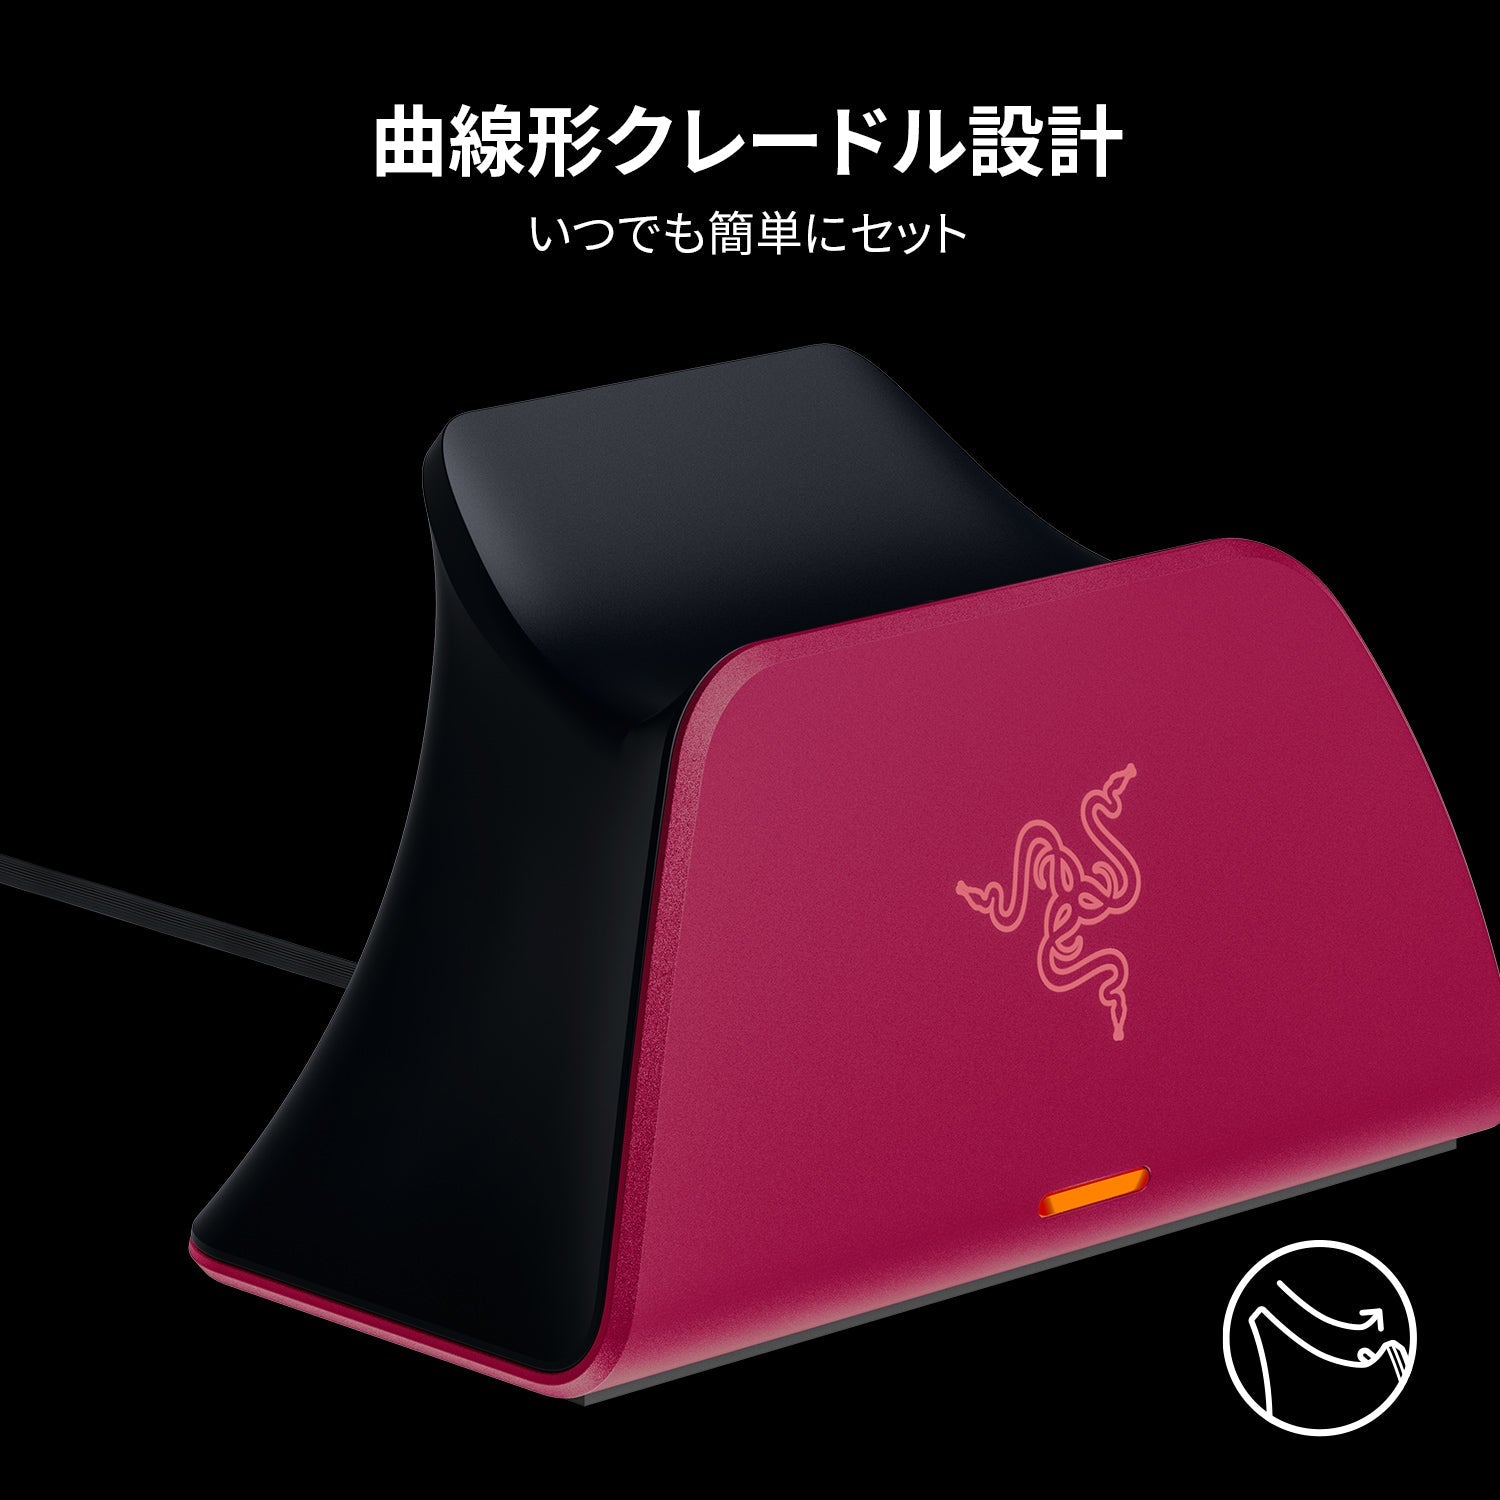 Razer Quick Charging Stand for PS5 (Purple)  クイック チャージング スタンド フォー ピーエスファイブ パープル thumbnail 3